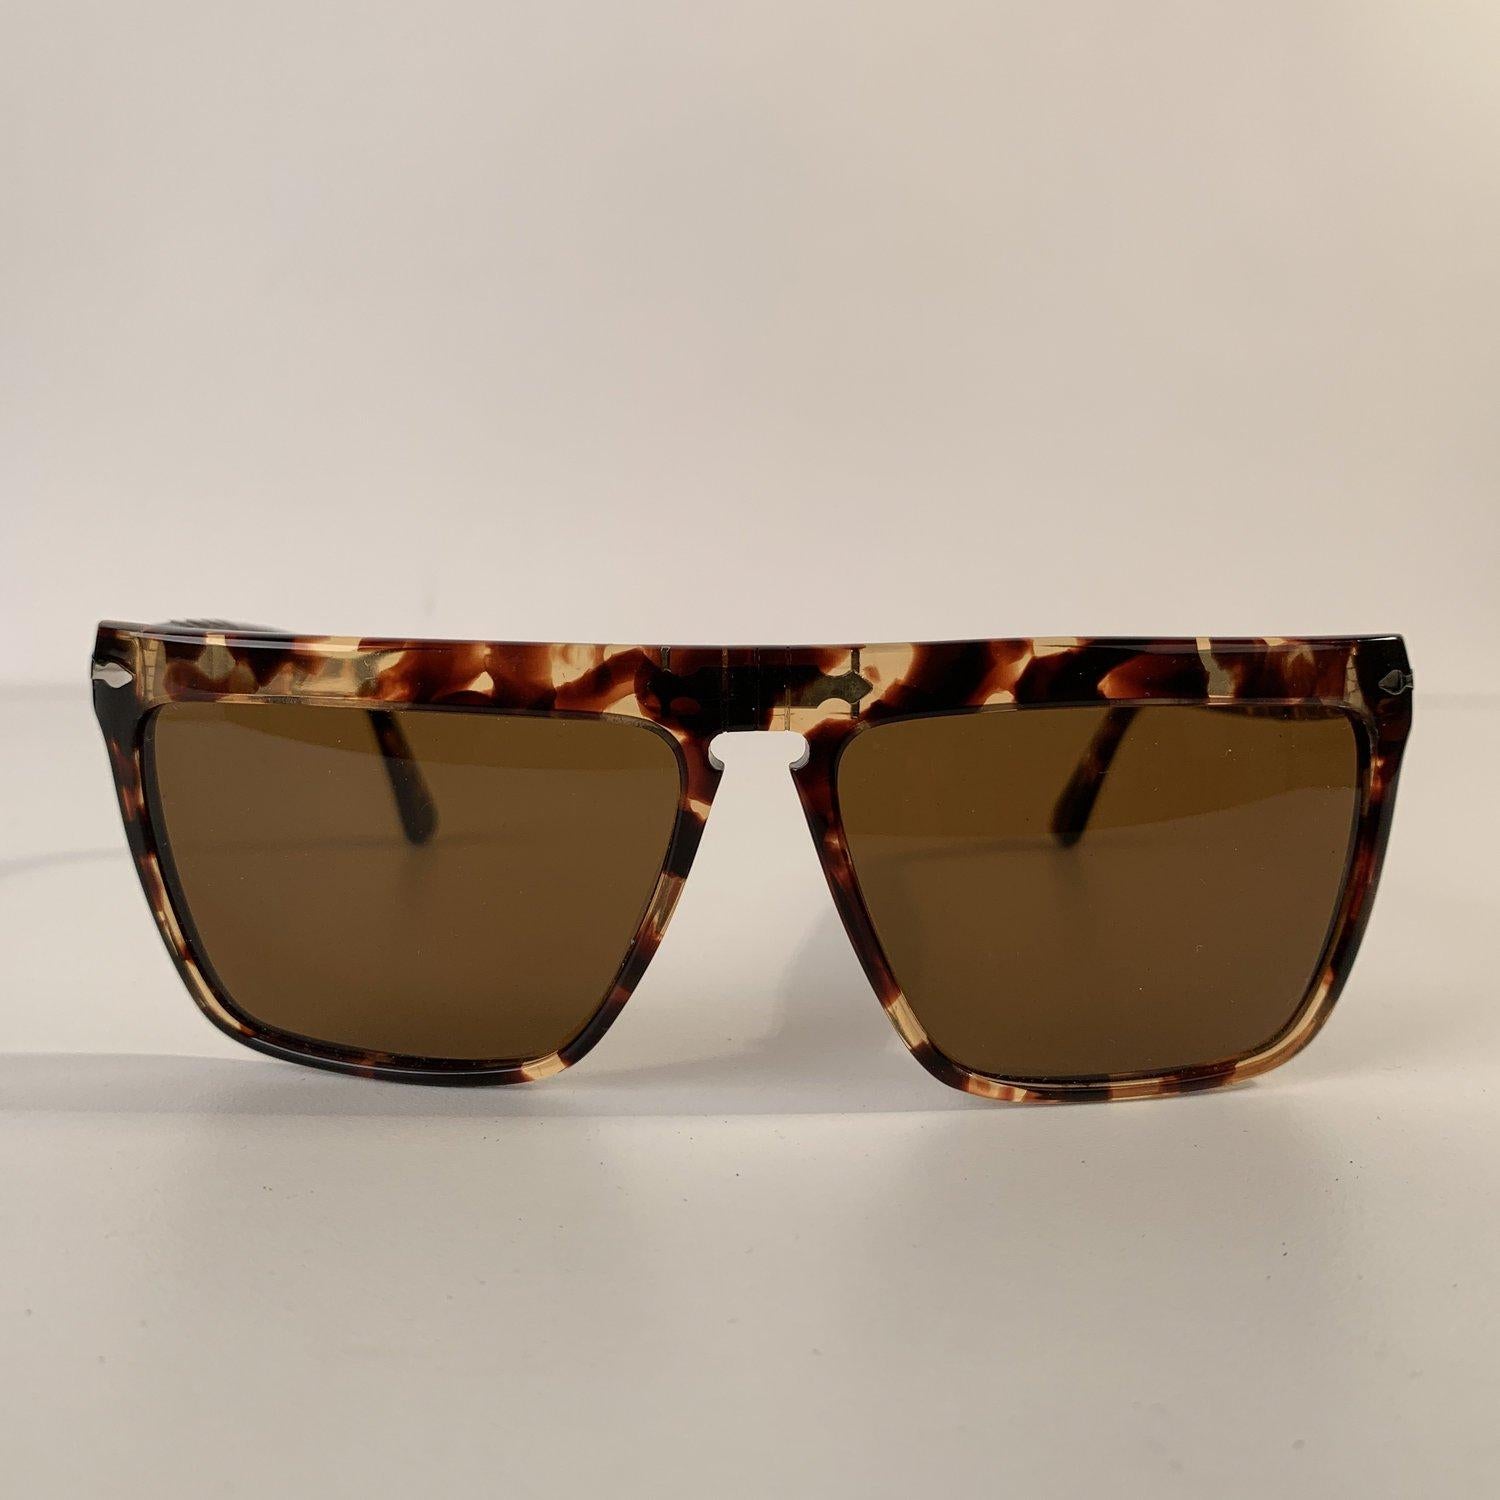 MATERIAL: Acetate COLOR: Brown MODEL: 801/52 GENDER: Adult Unisex SIZE: Medium Condition A+ - MINT NOS - New Old Vintage Stock - Mint Condition, never worn or used - Comes with a Persol Case Measurements EYEWEAR MAX WIDTH:135 mm TEMPLE MAX. LENGTH: